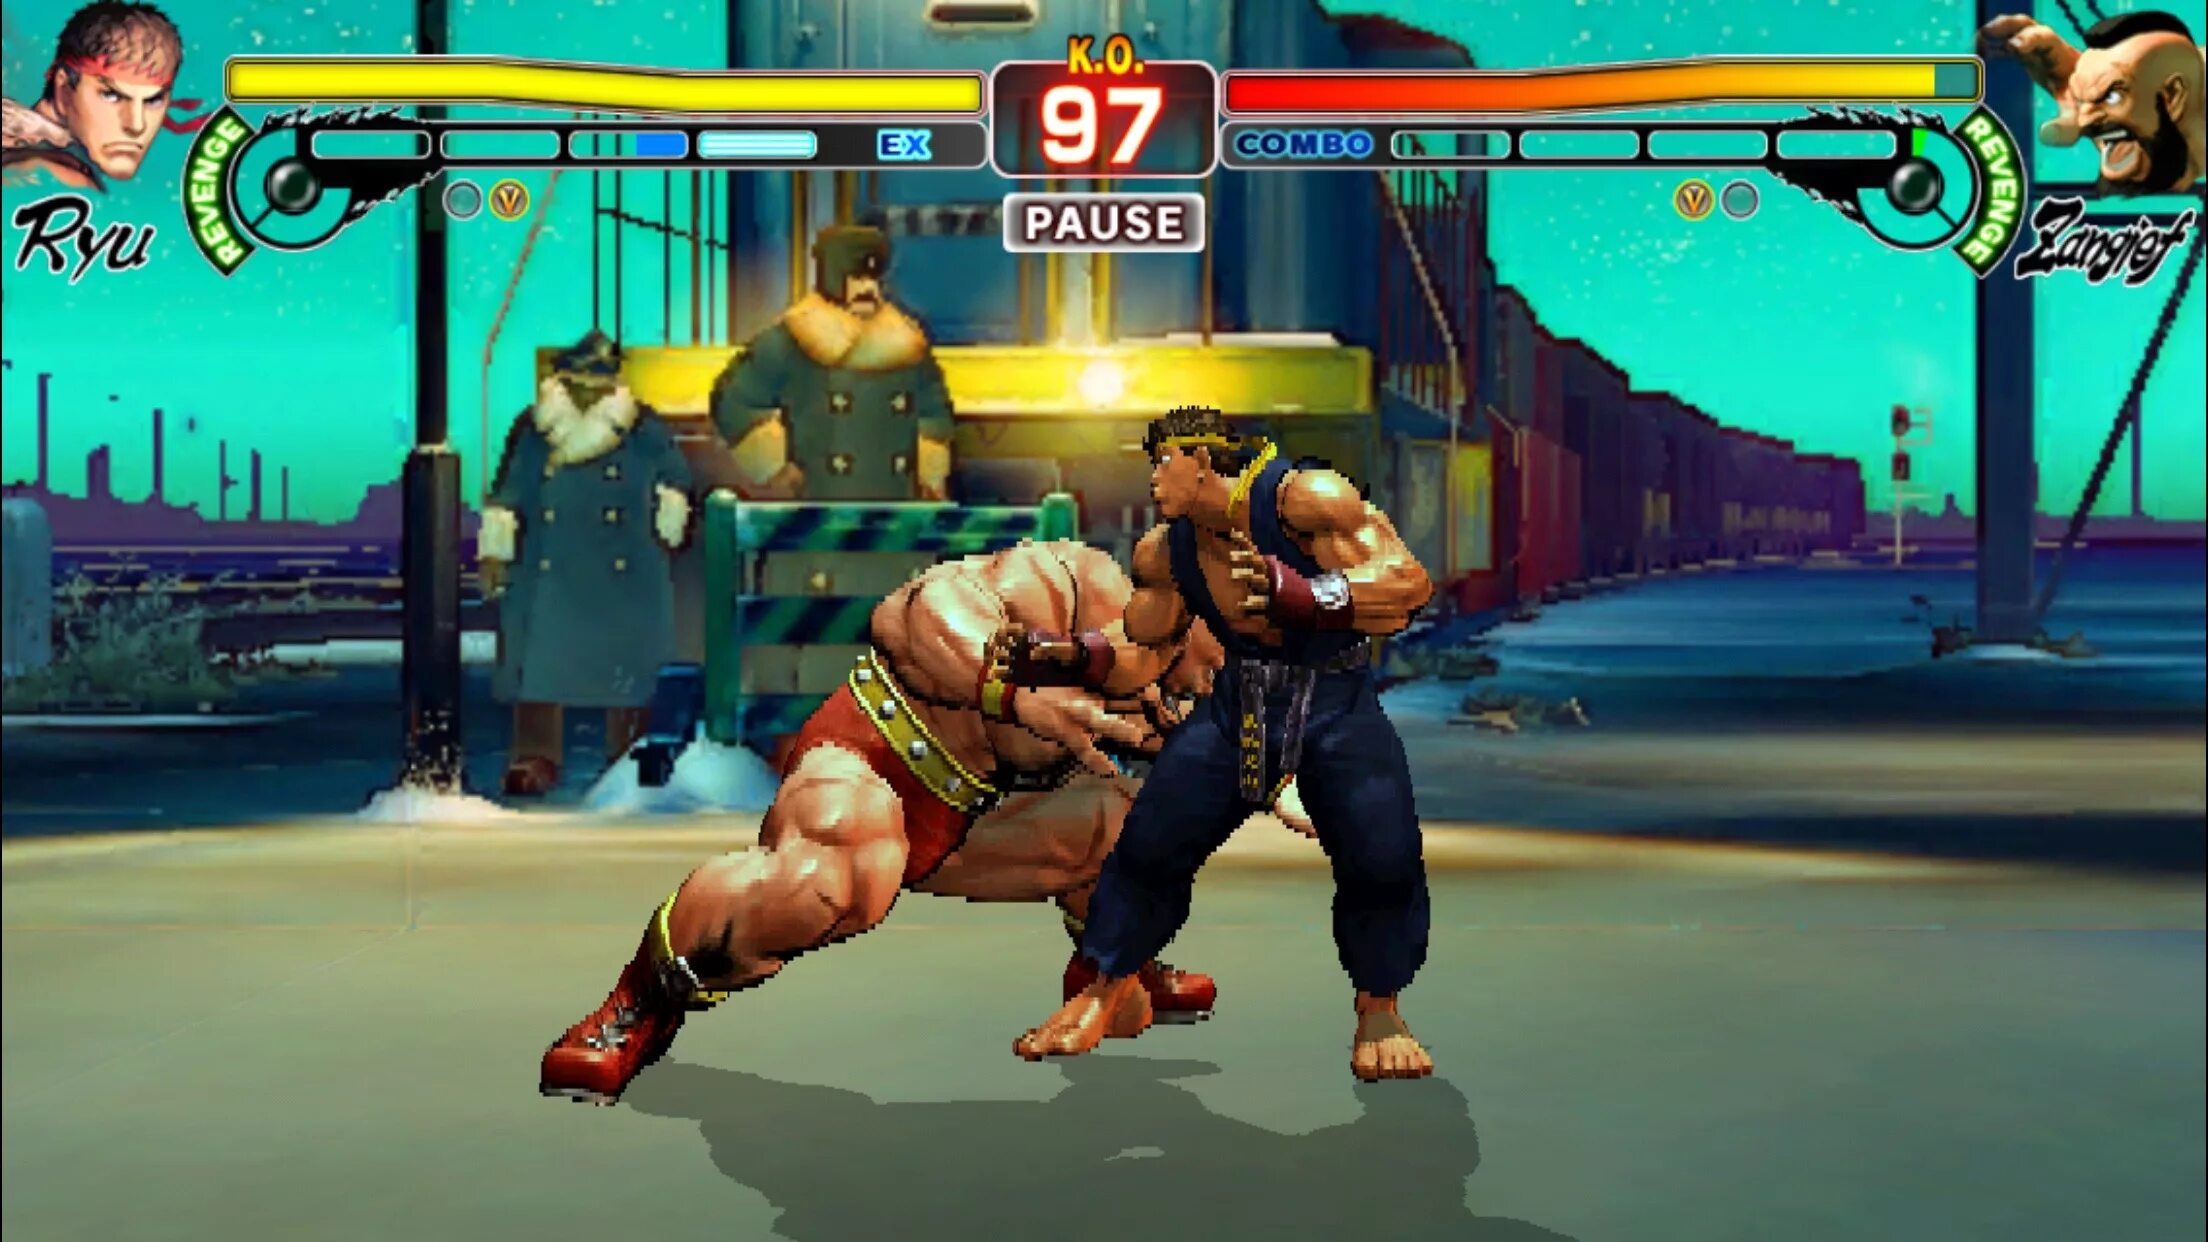 Street Fighter Champion Edition. Street Fighter IV. Файтинг. Street Fighter 4 Champion Edition. Street Fighter 6 Ultimate Edition. Mobile game combo pack